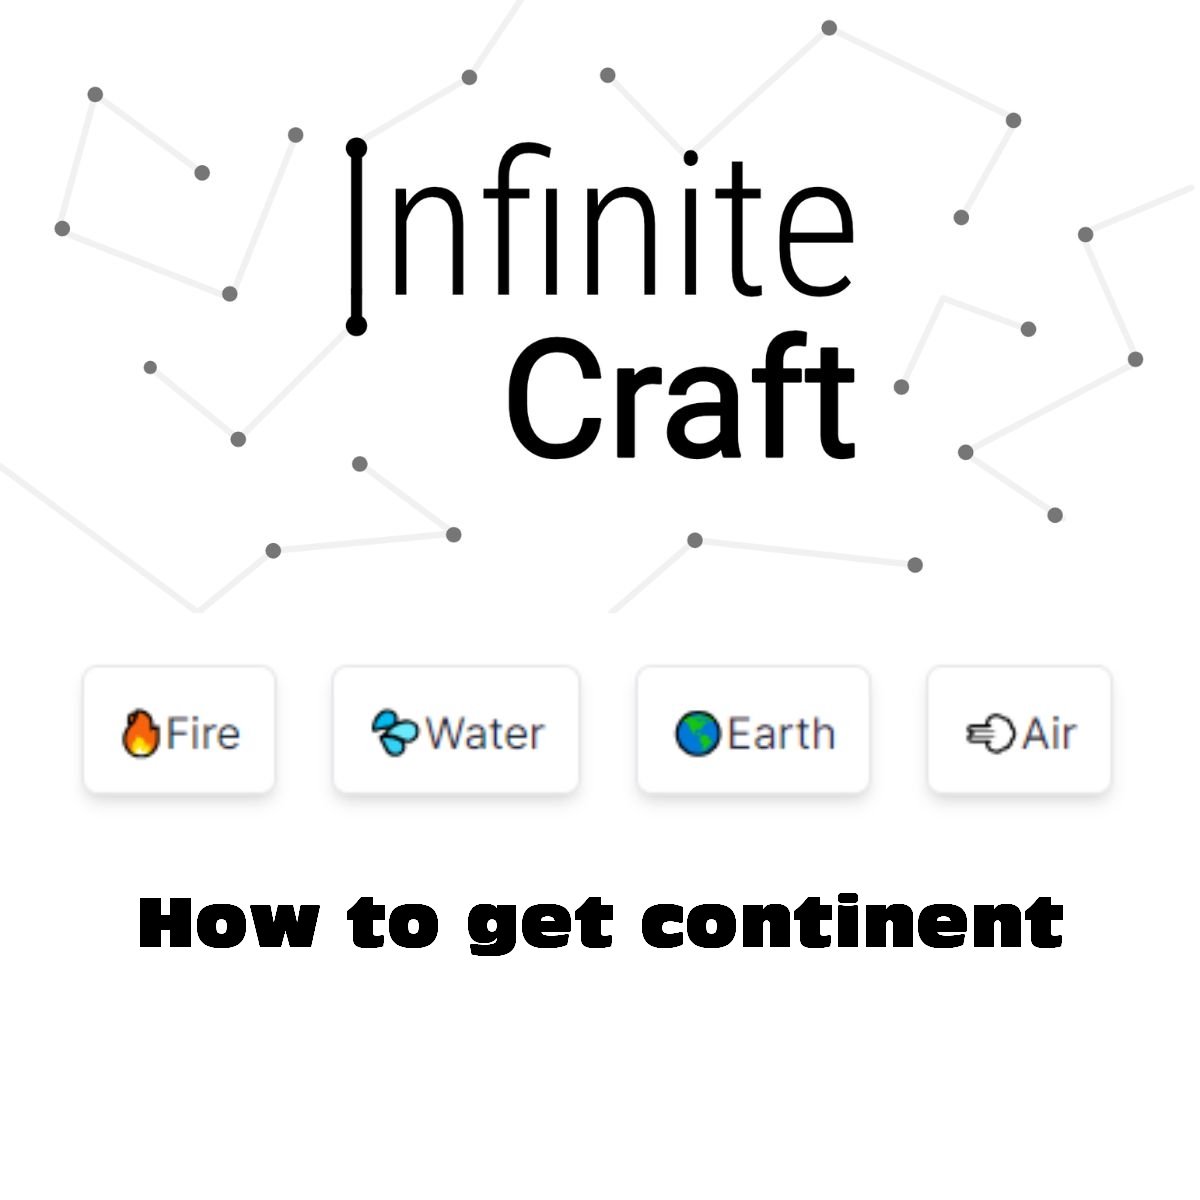 how to get continent in infinite craft